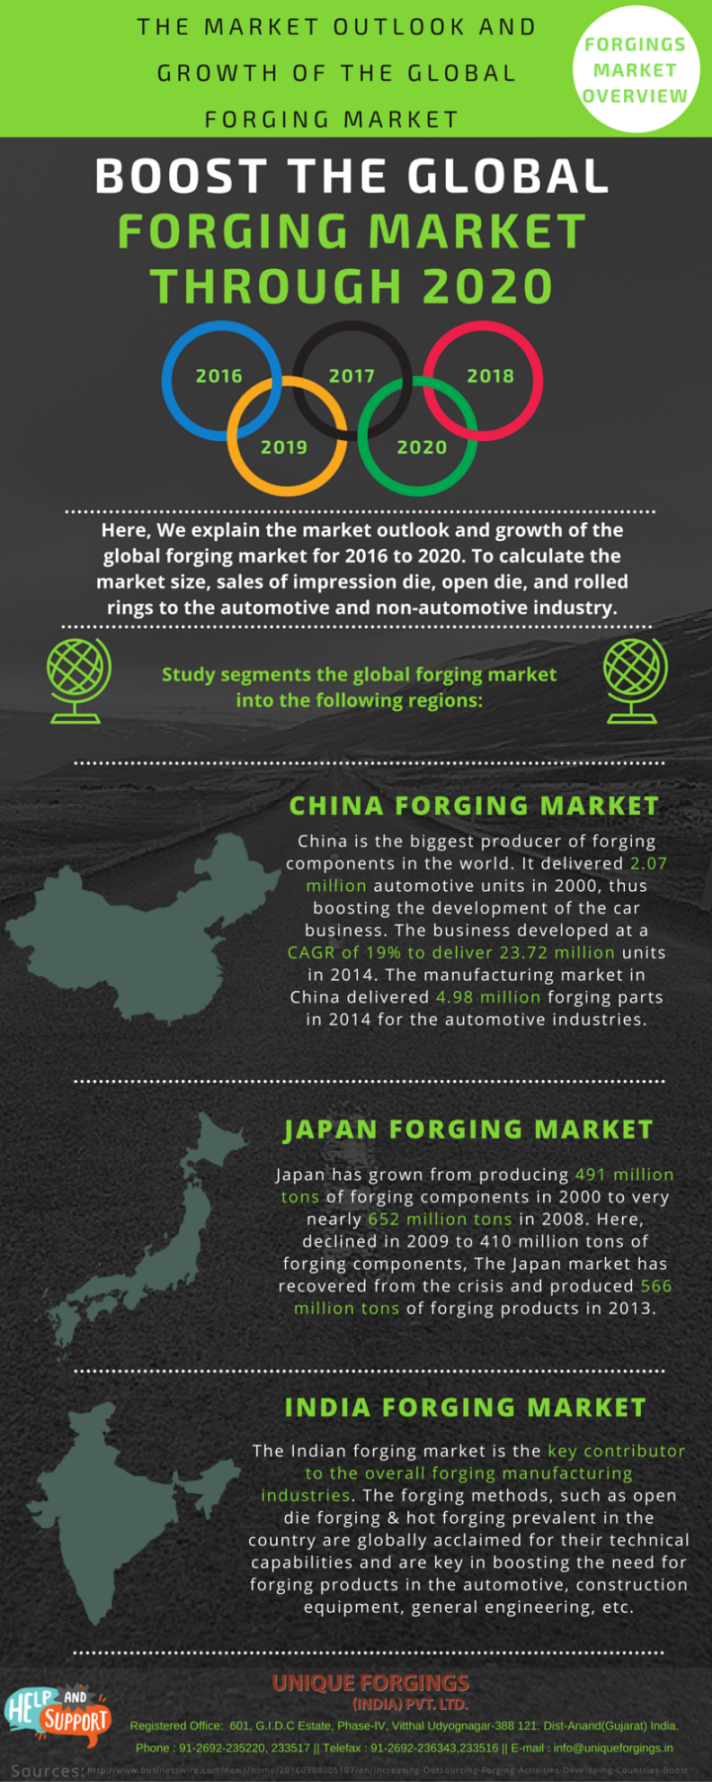 Boost the Global Forging Market Through 2020